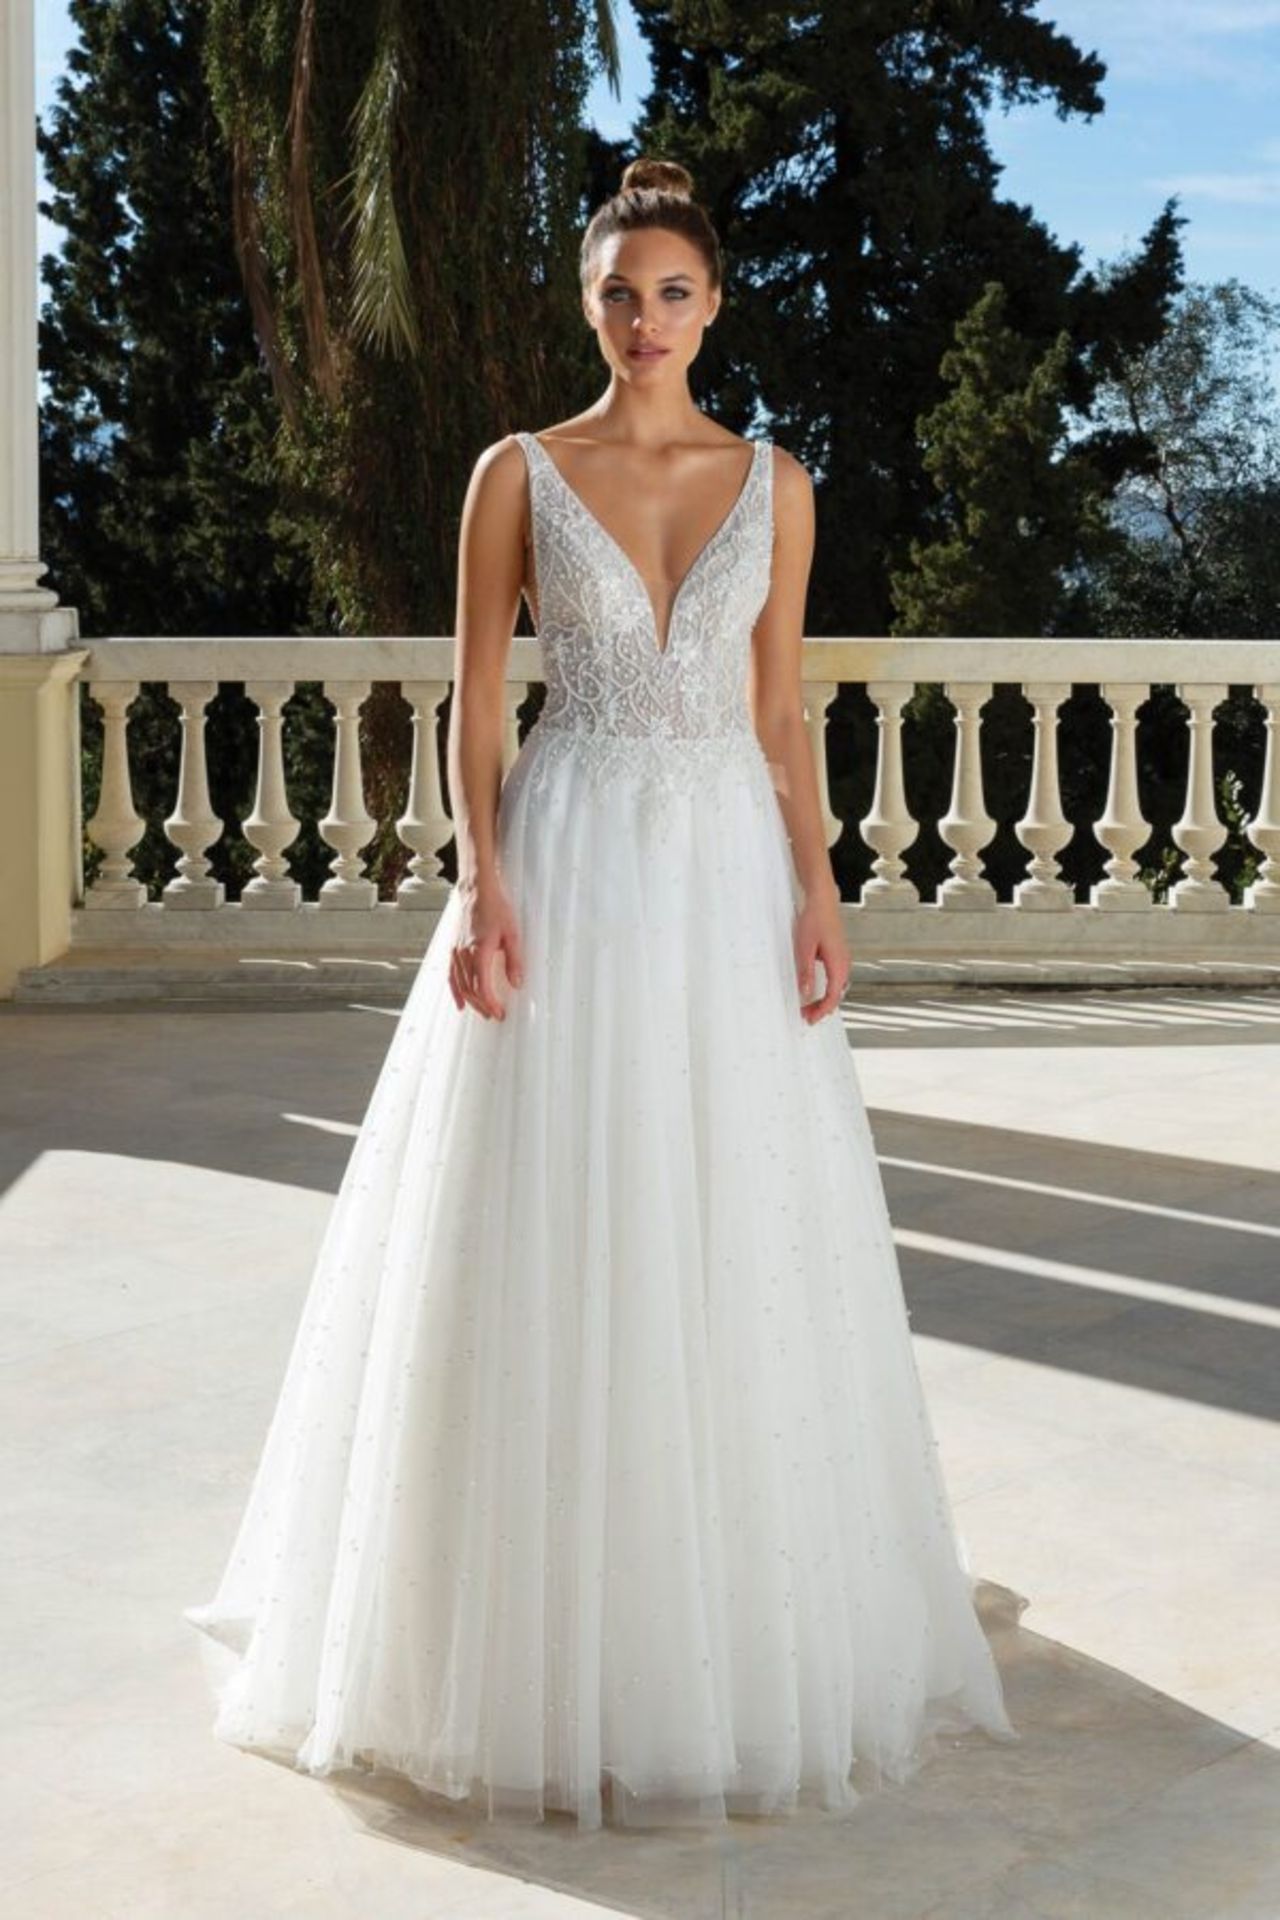 1 x Justin Alexander Designer Wedding Dress With Embroidered Bodice - Size 12 - RRP £1,600 - Image 7 of 8